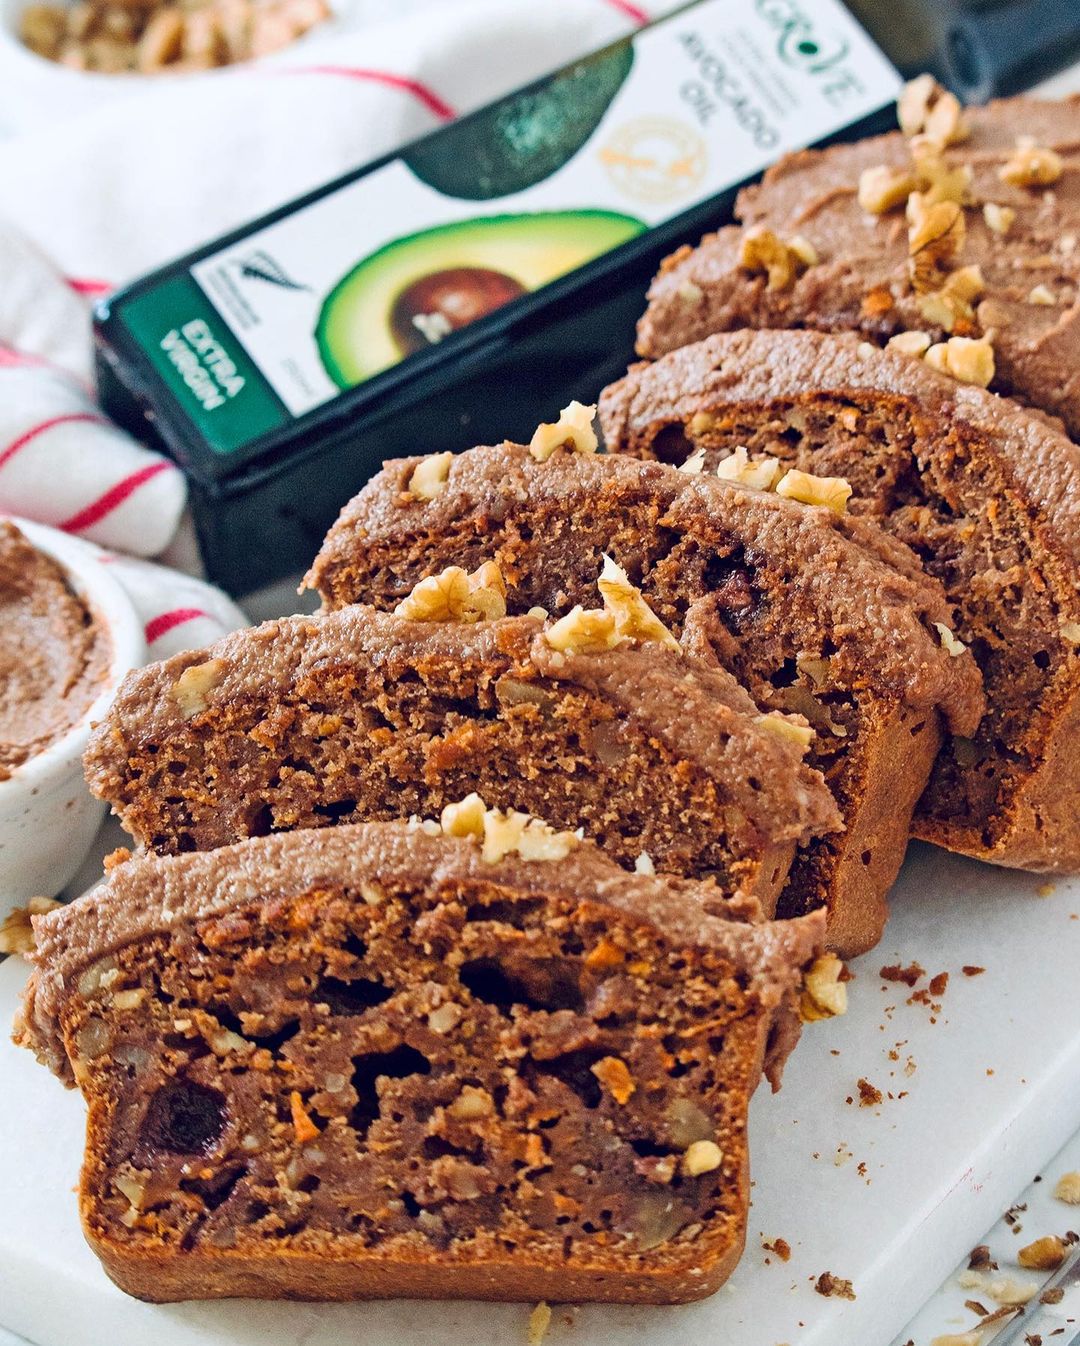 Carrot Cake with a New Twist